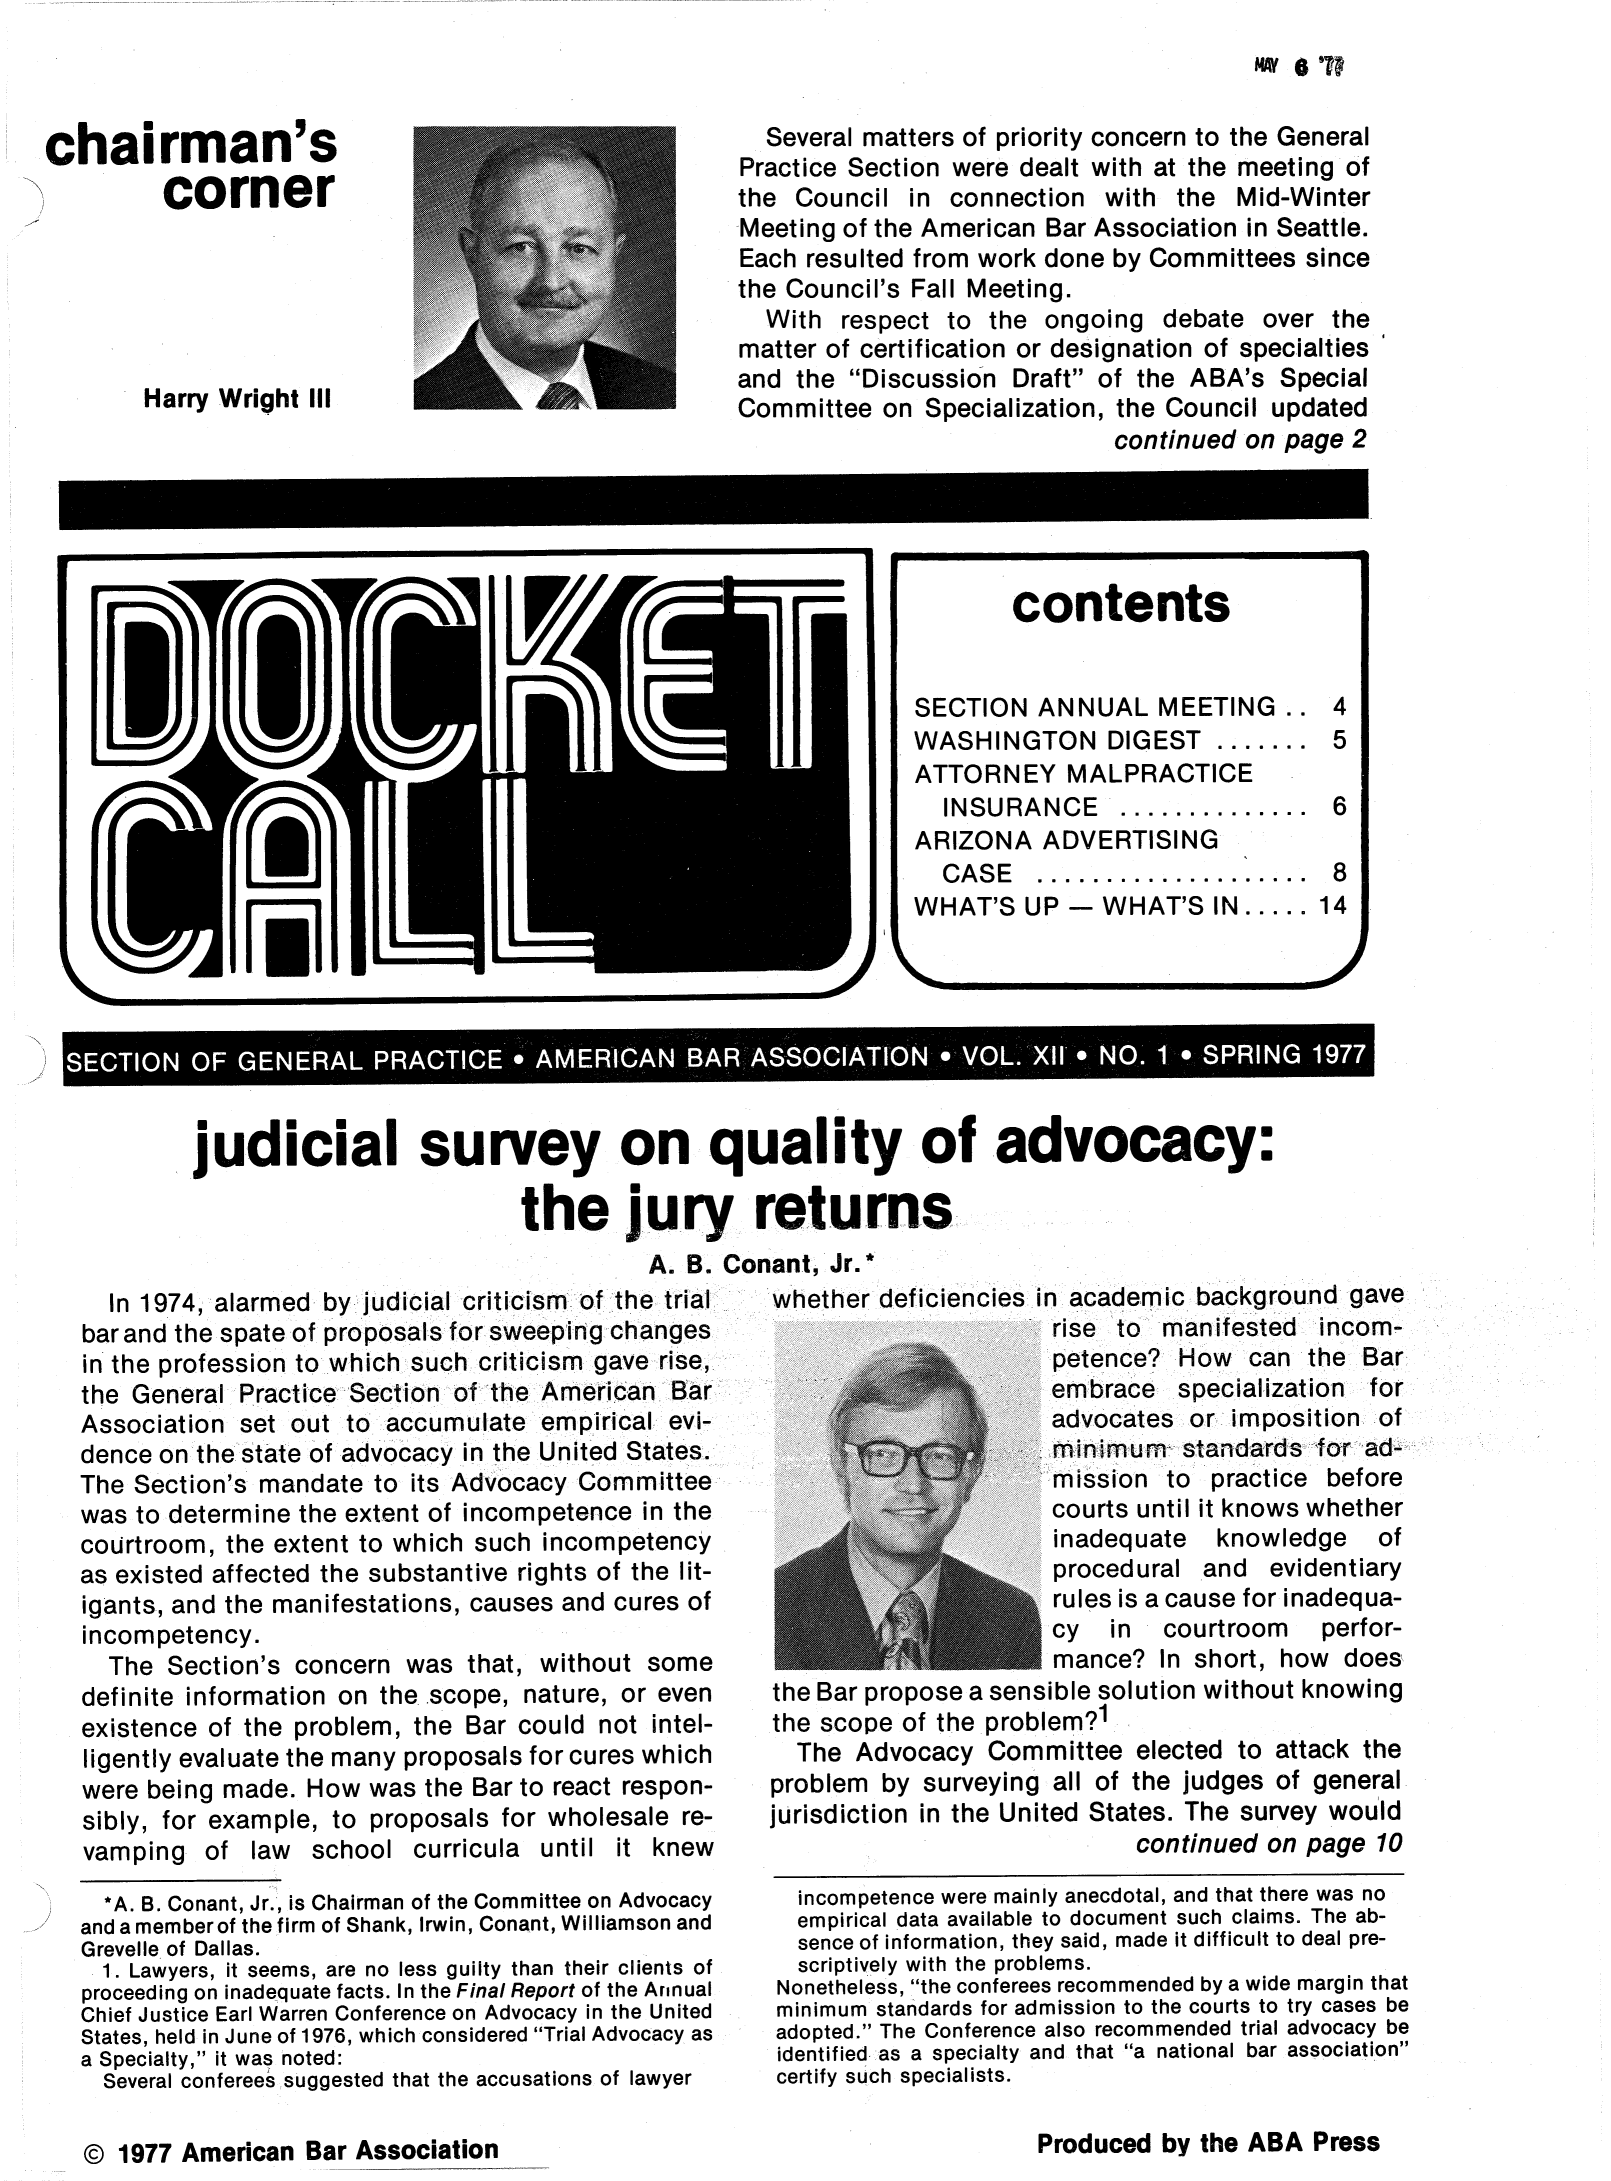 handle is hein.journals/dcktcll12 and id is 1 raw text is: chairman's
corner
Harry Wright III

j

NAY 6 CR

Several matters of priority concern to the General
Practice Section were dealt with at the meeting of
the Council in connection with the Mid-Winter
Meeting of the American Bar Association in Seattle.
Each resulted from work done by Committees since
the Council's Fall Meeting.
With respect to the ongoing debate over the
matter of certification or designation of specialties
and the Discussion Draft of the ABA's Special
Committee on Specialization, the Council updated
continued on page 2

udicial survey on quality of advocacy:
the jury returns
A. B. Conant, Jr.

In 1974, alarmed by judicial criticism of the trial
barand the spate of proposals for sweeping changes
in the profession to which such criticism gave rise,
the General PracticerSecttin of the American Bar
Association set out to accumulate empirical evi-
dence onthe state of advocacy in the United States.
The Section's mandate to its Advocacy Committee,
was to determine the extent of incompetence in the
courtroom, the extent to which such incompetency
as existed affected the substantive rights of the lit-
igants, and the manifestations, causes and cures of
incompetency.
The Section's concern was that, without some
definite information on the scope, nature, or even
existence of the problem, the Bar could not intel-
ligently evaluate the many proposals for cures which
were being made. How was the Bar to react respon-
sibly, for example, to proposals for wholesale re-
vamping of law school curricula until it knew
*A. B. Conant, Jr., is Chairman of the Committee on Advocacy
and a member of the firm of Shank, Irwin, Conant, Williamson and
Grevelle of Dallas.
1. Lawyers, it seems, are no less guilty than their clients of
proceeding on inadequate facts. In the Final Report of the Annual
Chief Justice Earl Warren Conference on Advocacy in the United
States, held in June of 1976, which considered Trial Advocacy as
a Specialty, it was noted:
Several conferees suggested that the accusations of lawyer

whether deficiencies in academic background gave
rise to  manifested   incom-
petence? How    can the Bar
embrace    specialization  for
advocates or imposition of
mni imurm  standards for ad
mission to   practice before
courts until it knows whether
inadequate    knowledge    of
procedural and    evidentiary
rules is a cause for inadequa-
cy  in   courtroom    perfor-
mance? In short, how    does
the Bar propose a sensible solution without knowing
the scope of the problem?1
The Advocacy Committee elected to attack the
problem by surveying all of the judges of general
jurisdiction in the United States. The survey would
continued on page 10
incompetence were mainly anecdotal, and that there was no
empirical data available to document such claims. The ab-
sence of information, they said, made it difficult to deal pre-
scriptively with the problems.
Nonetheless, the conferees recommended by a wide margin that
minimum standards for admission to the courts to try cases be
adopted. The Conference also recommended trial advocacy be
identified as a specialty and that a national bar association
certify such specialists.

Produced by the ABA Press

© 1977 American Bar Association

contents
SECTION ANNUAL MEETING  4
WASHINGTON DIGEST ....... 5
ATTORNEY MALPRACTICE
INSURANCE............. 6
ARIZONA ADVERTISING
CASE..............   8
WHAT'S UP - WHAT'S IN..... 14

SECTION OF GENERAL PRACTICE* AMERICAN BAR ASSOCIATION* VOL .X11 * NO. 1* SPRING 1977


